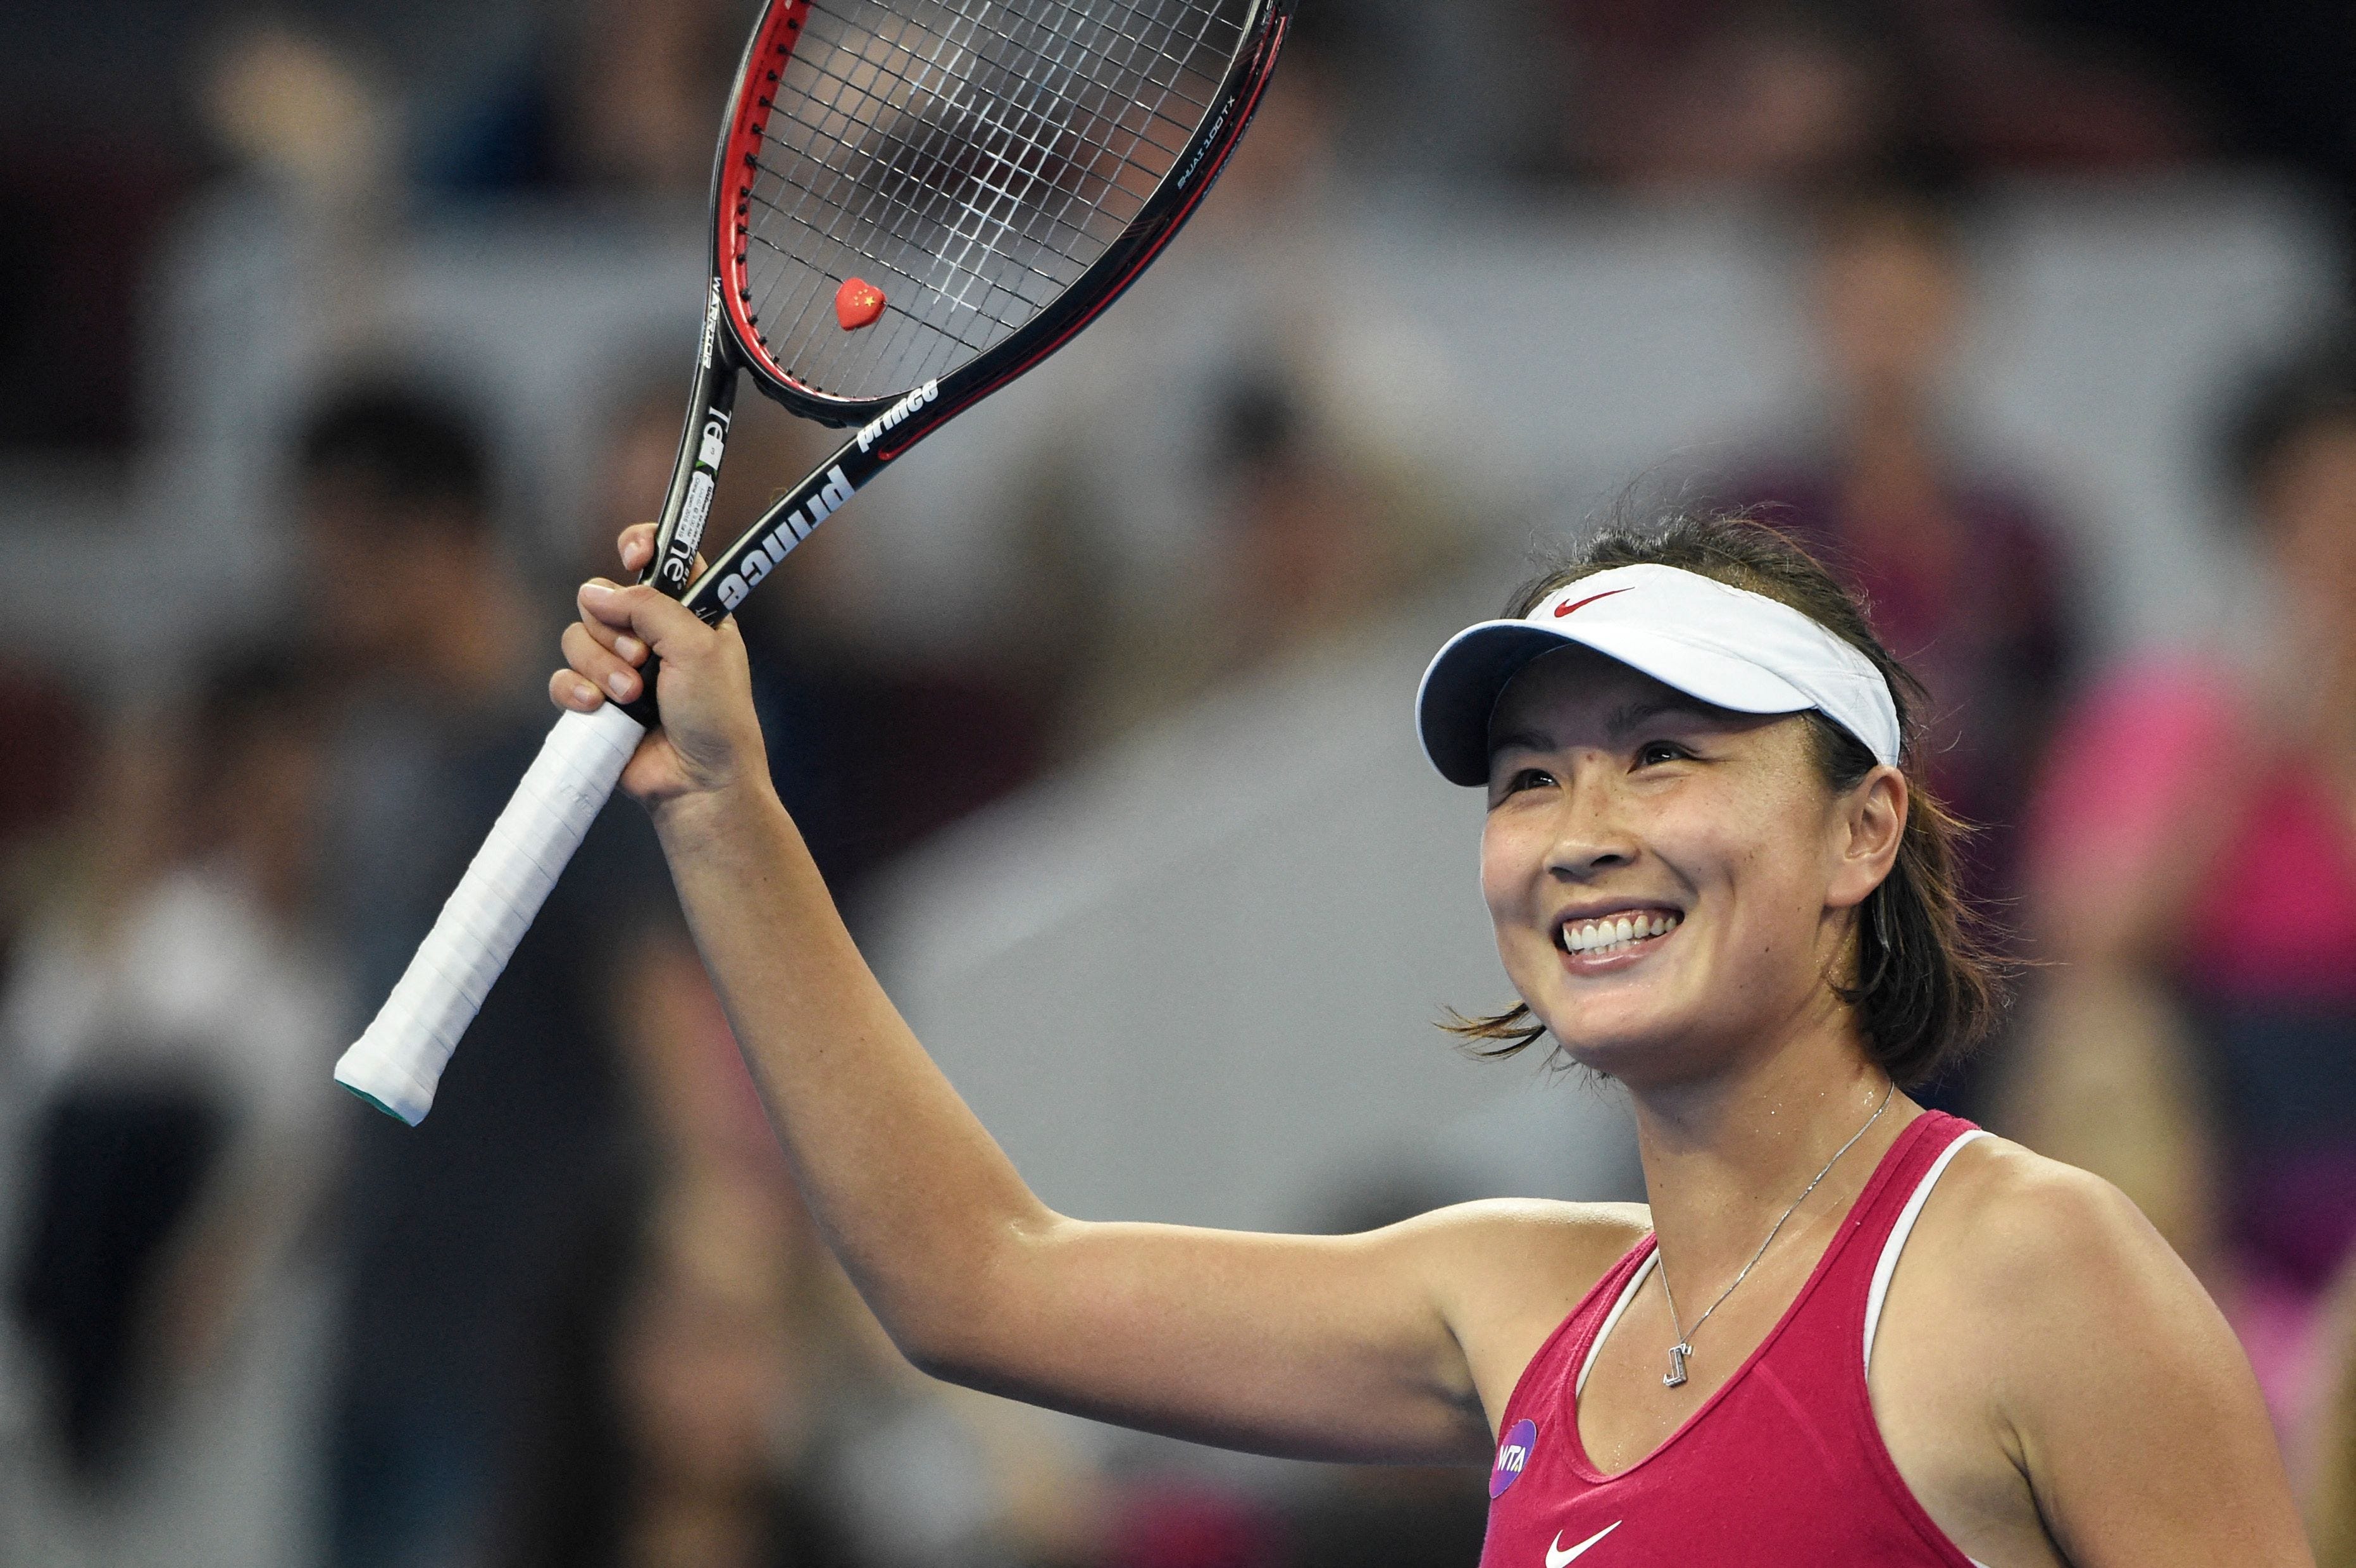 WTA suspends tennis events in China over concern for Peng Shuai following sexual assault allegations thumbnail